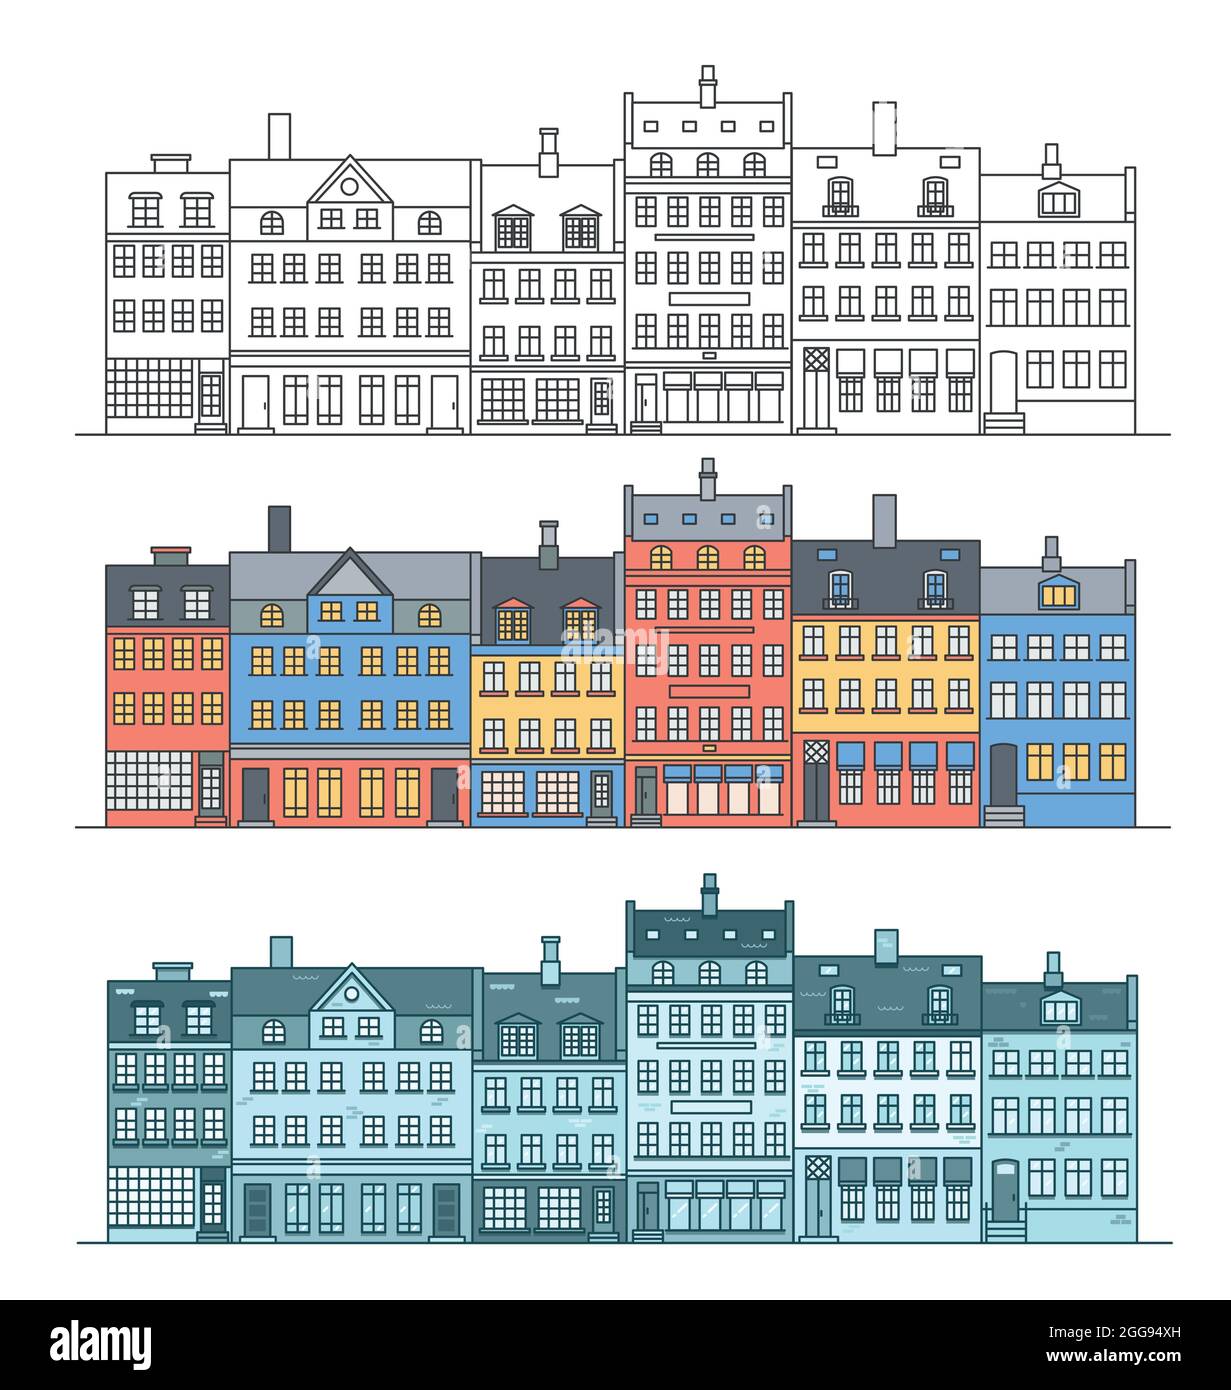 Amsterdam buildings skyline. Linear coloured cityscape with various row houses. Outline illustration with old Dutch buildings Stock Vector